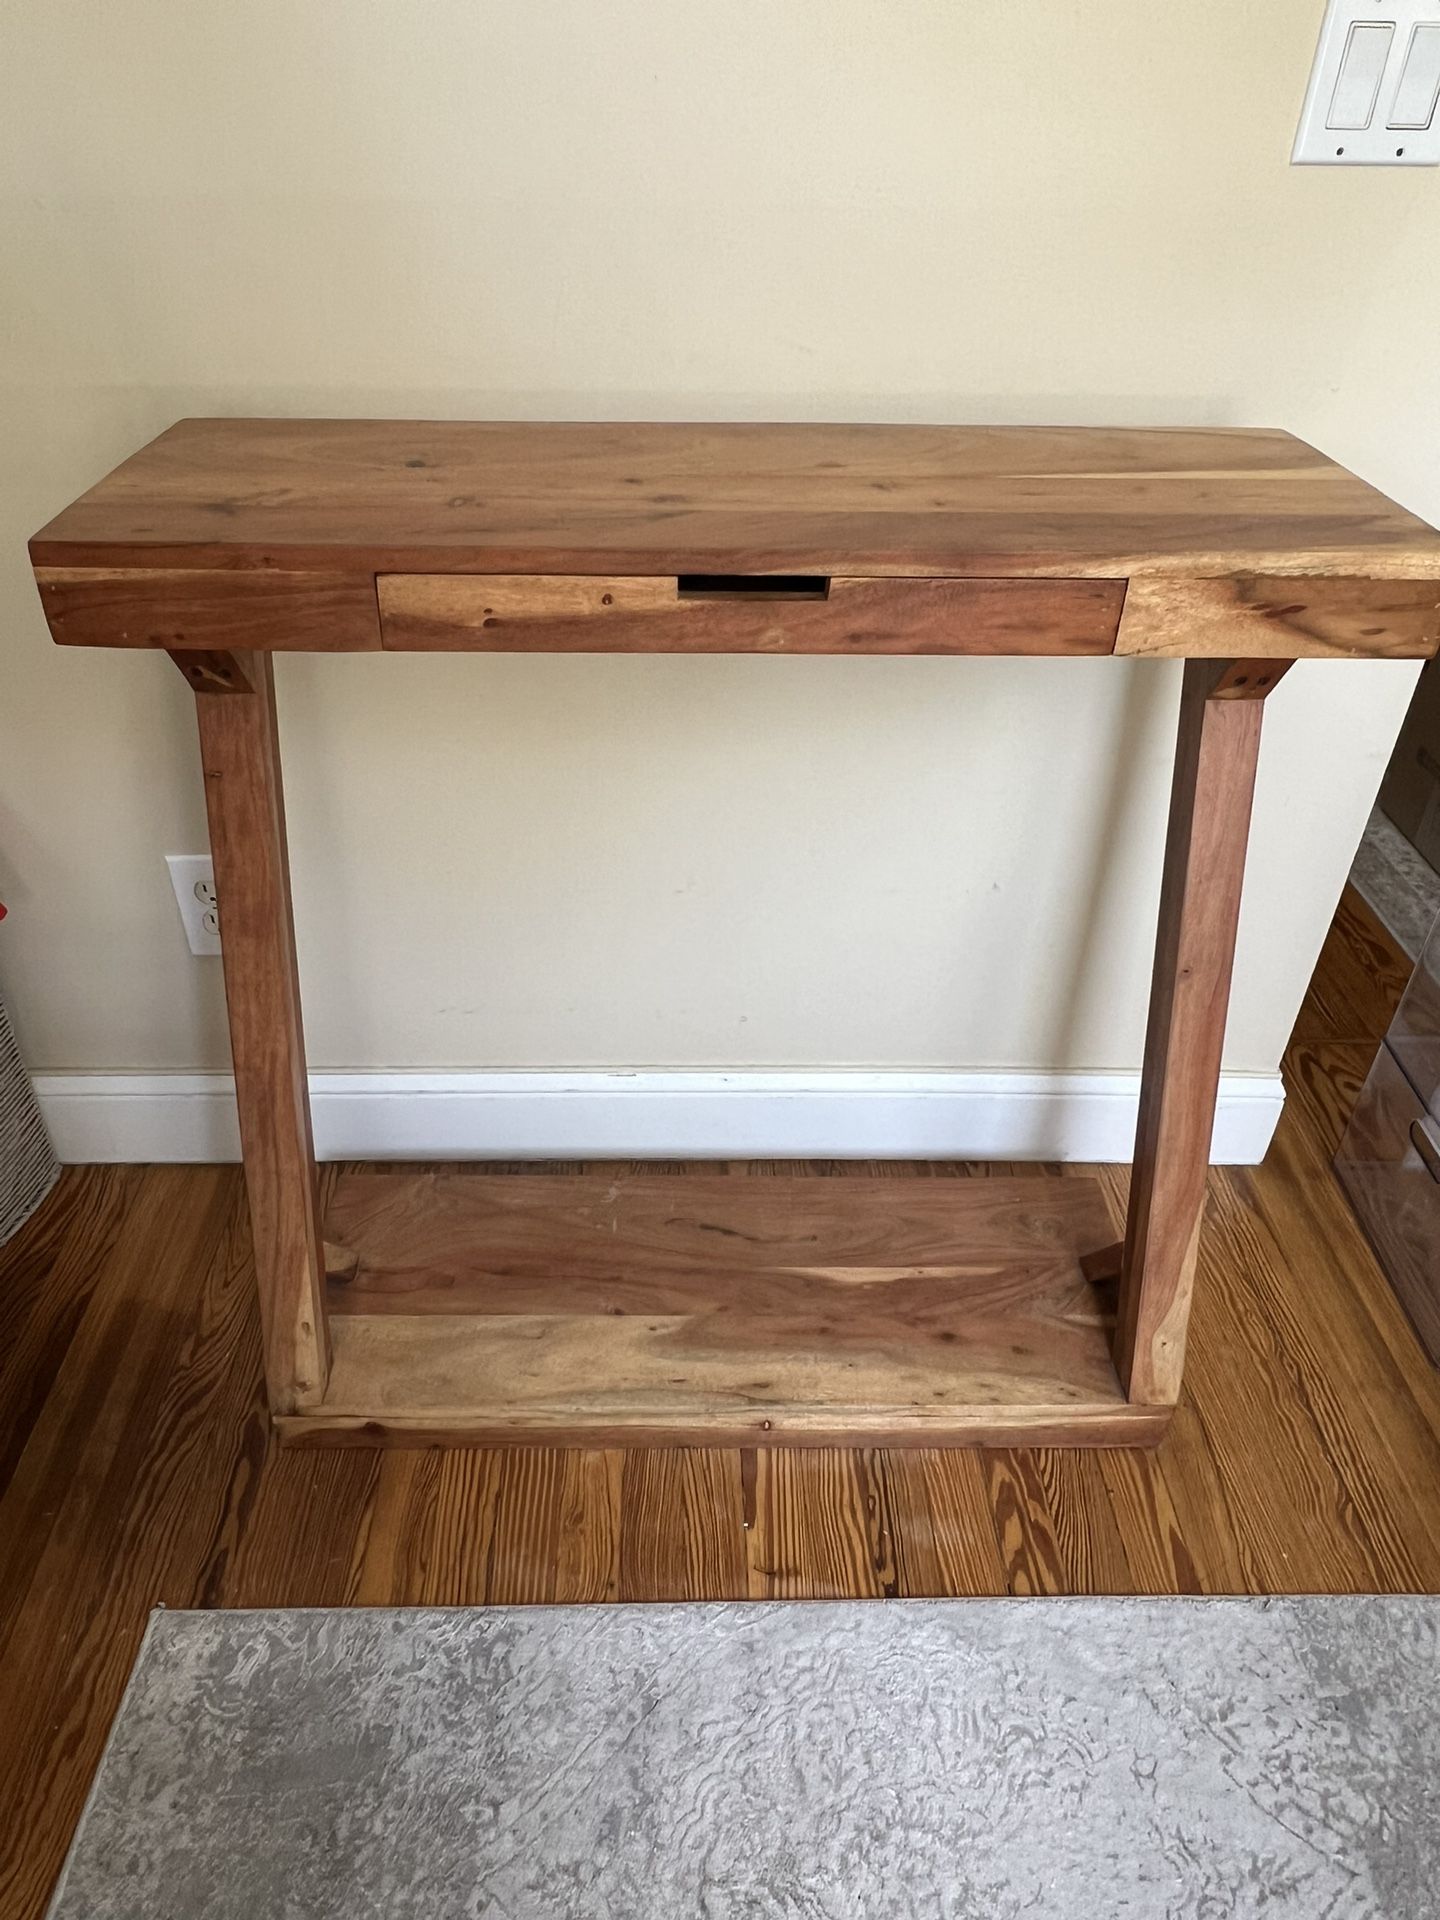 Wood Console Table - $40